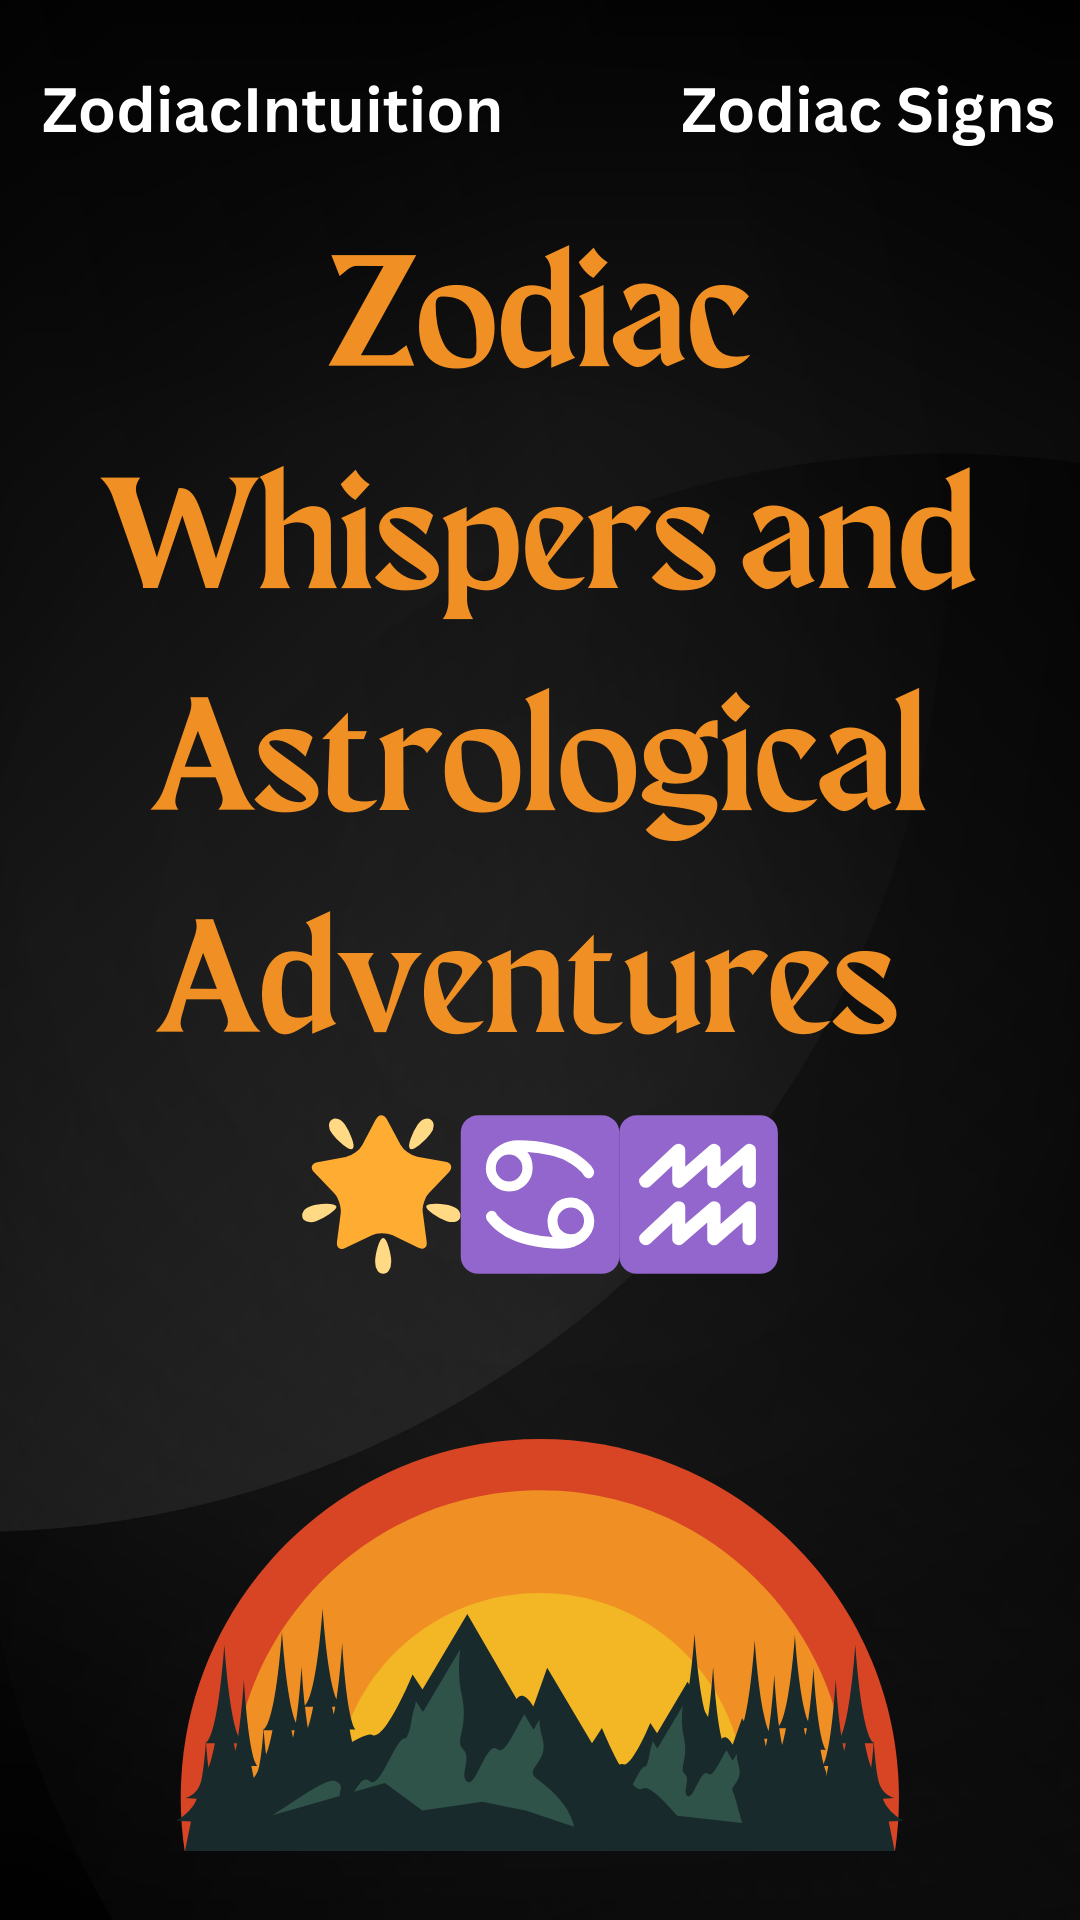 Zodiac Whispers and Astrological Adventures 🌟♋️♒️